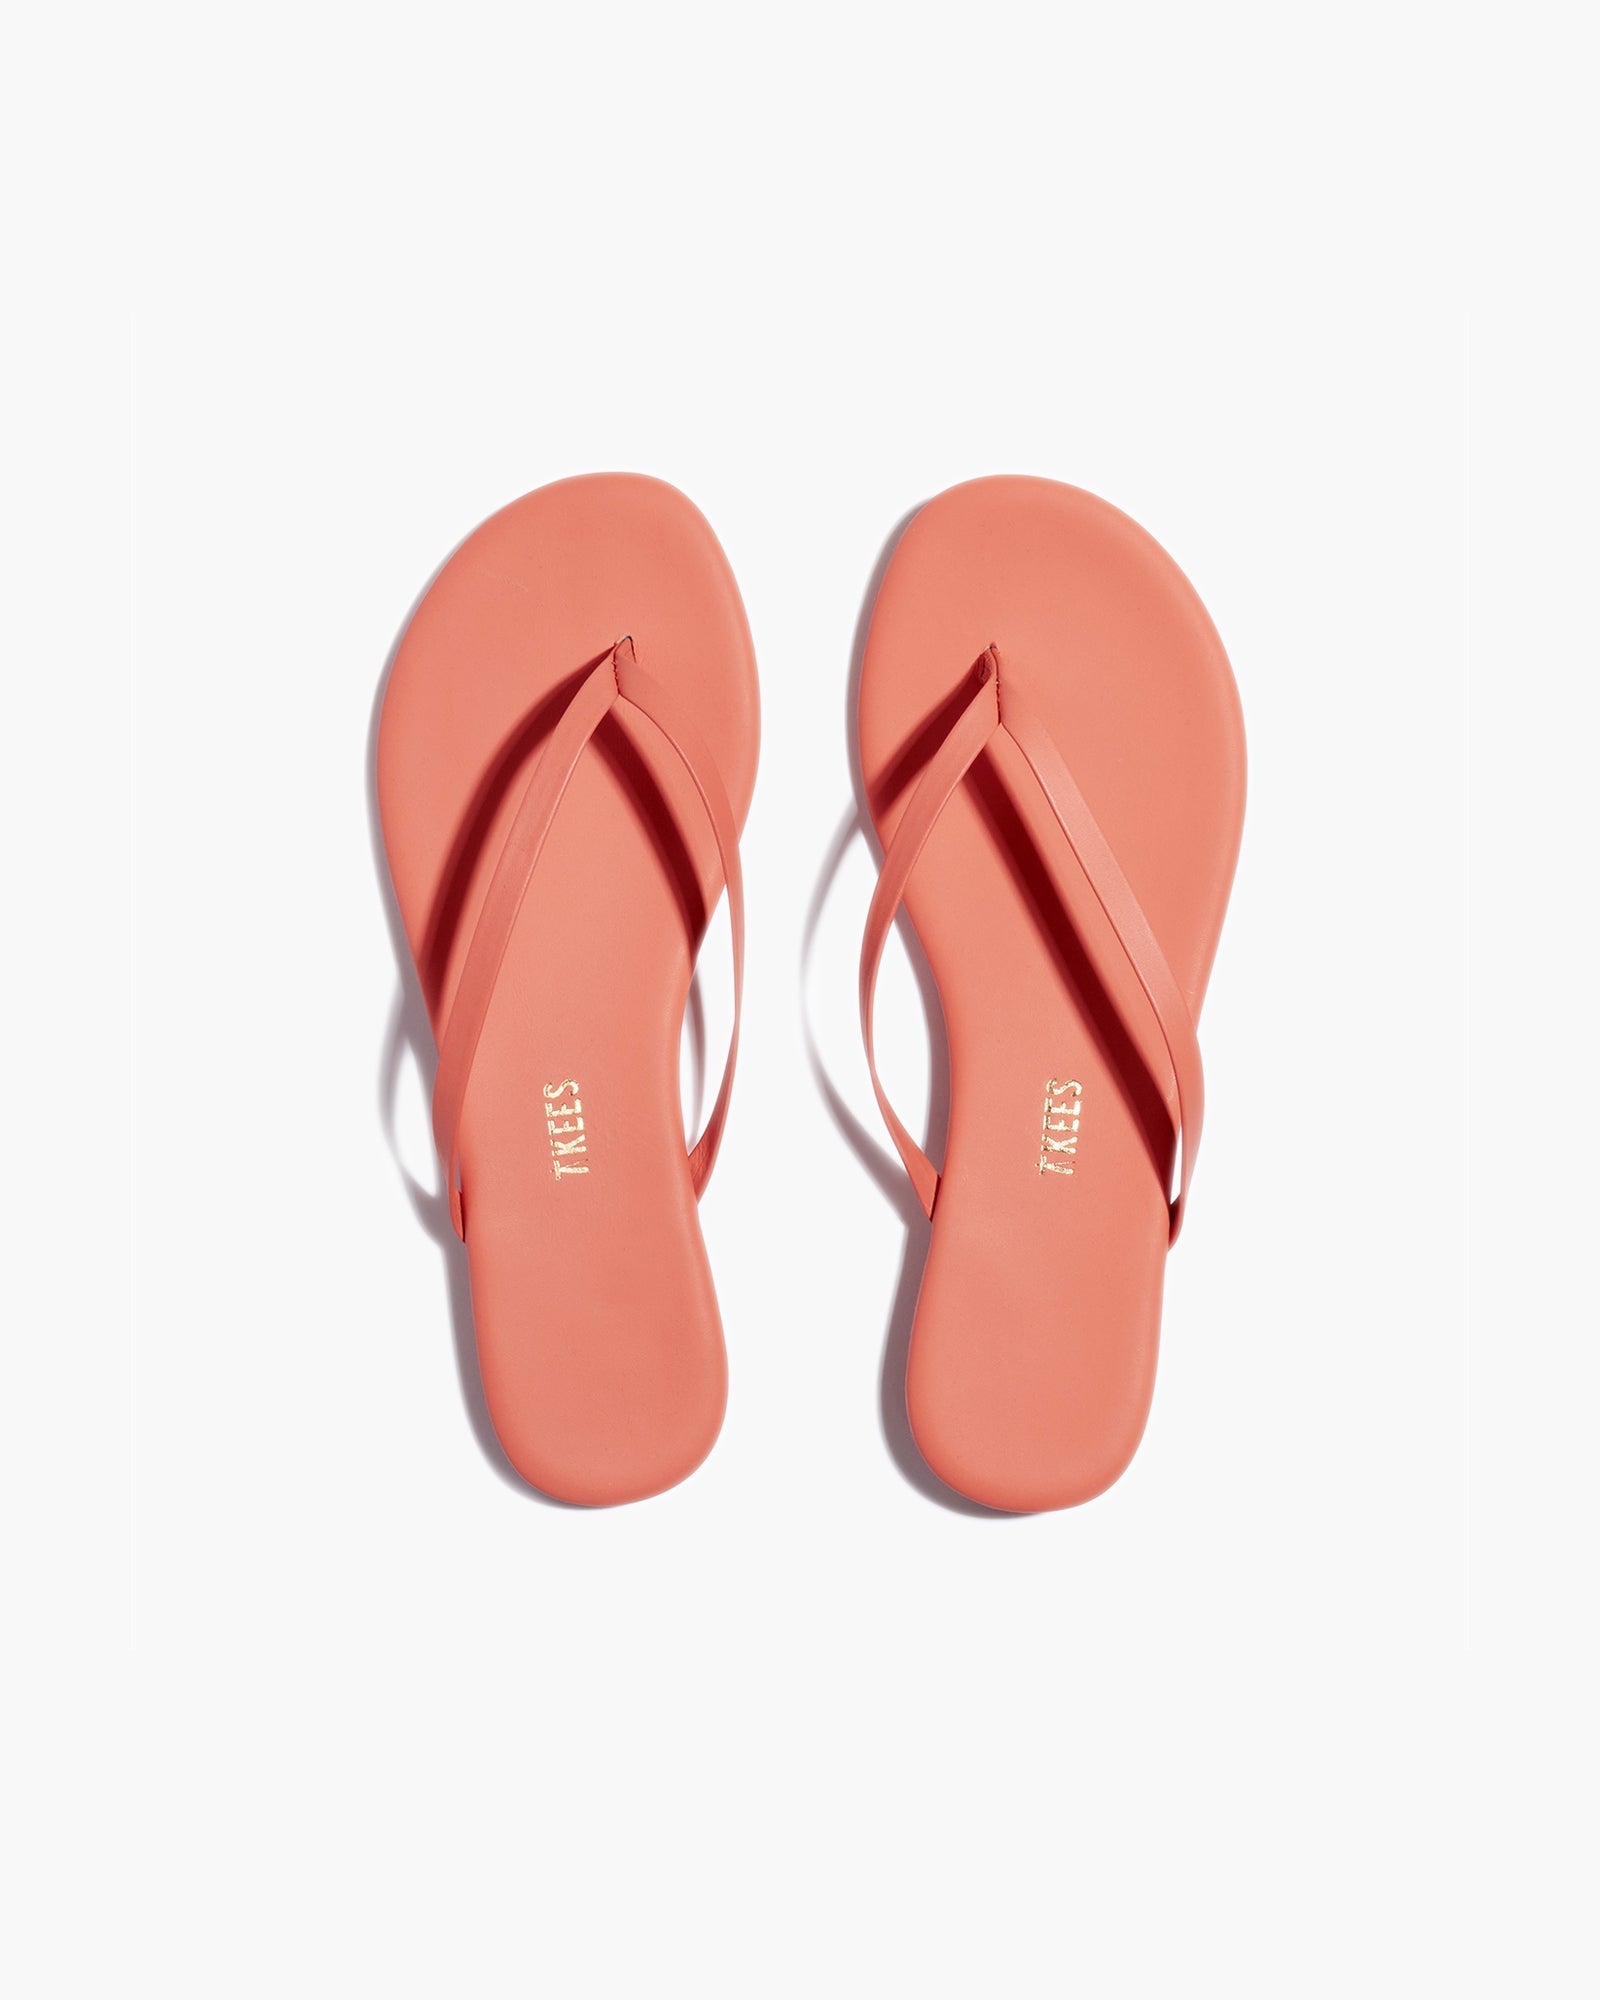 Orange Women\'s\'s\'s\'s\'s\'s\'s\'s\'s\'s\'s\'s\'s\'s\'s\'s\'s\'s\'s\'s\'s\'s TKEES Lily Pigments Flip Flops | BPMHIF709